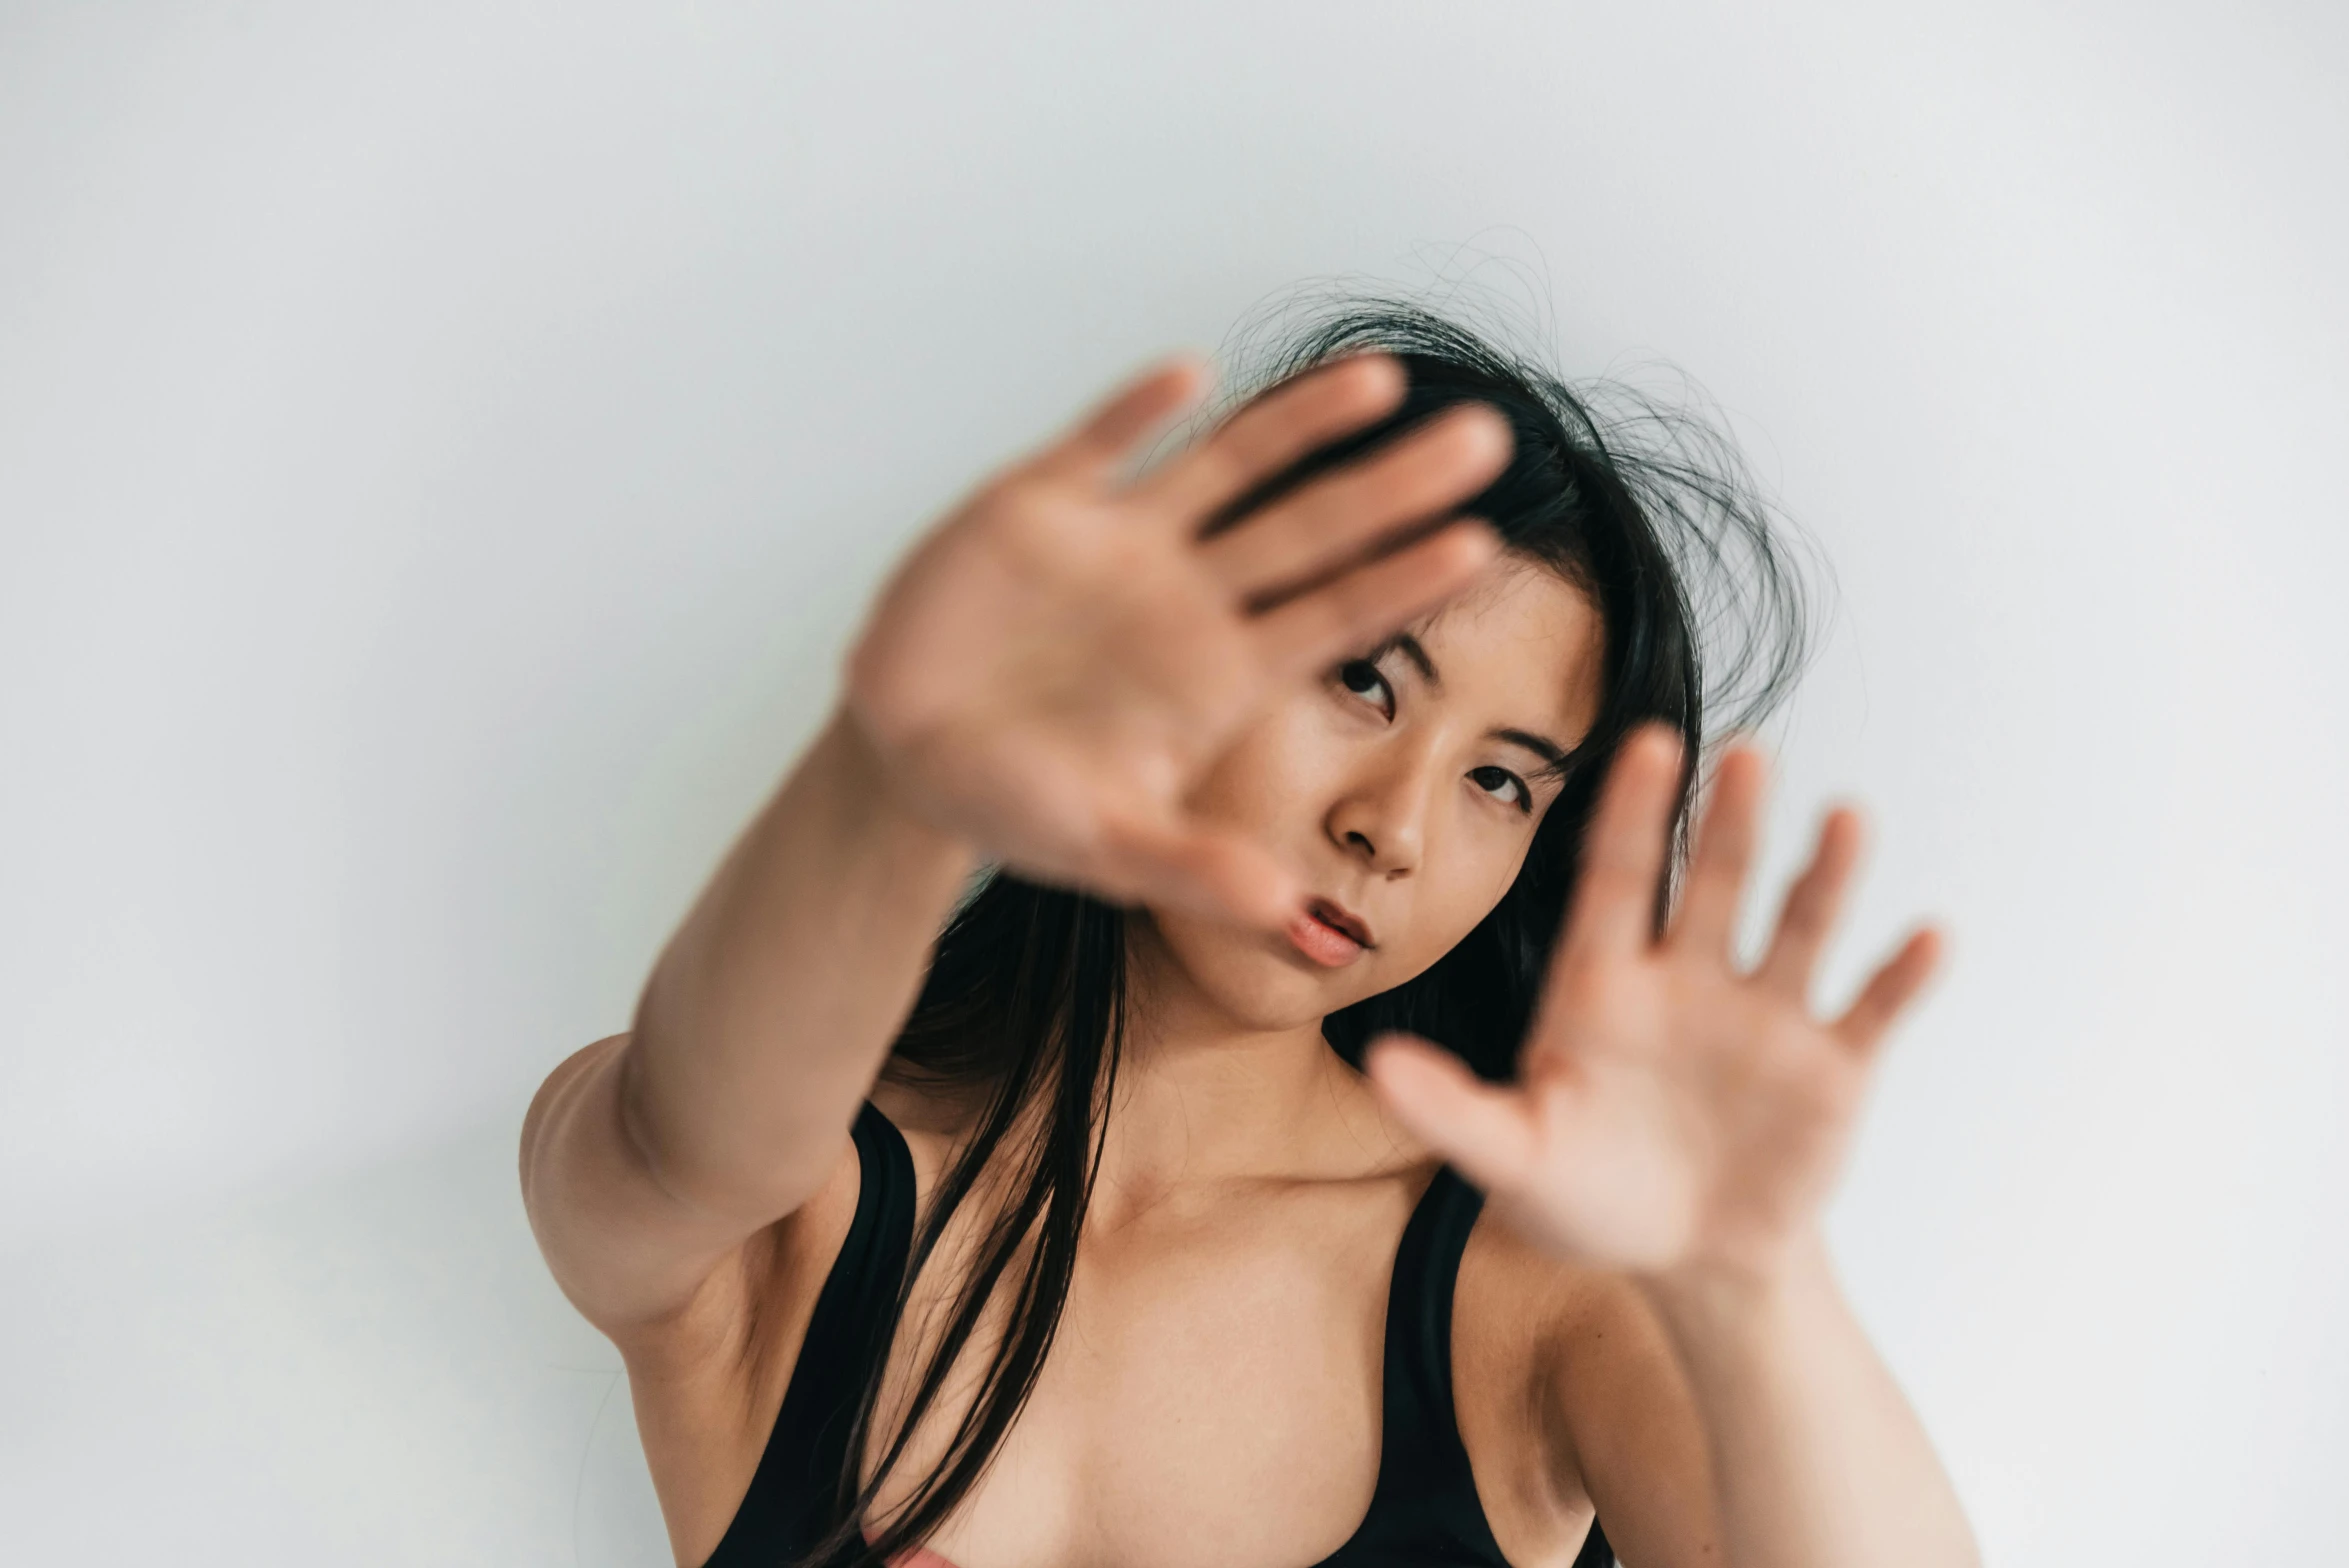 a woman making a stop sign with her hands, trending on pexels, visual art, asian face, she is wearing a black tank top, scratches on photo, woman with porcelain skin